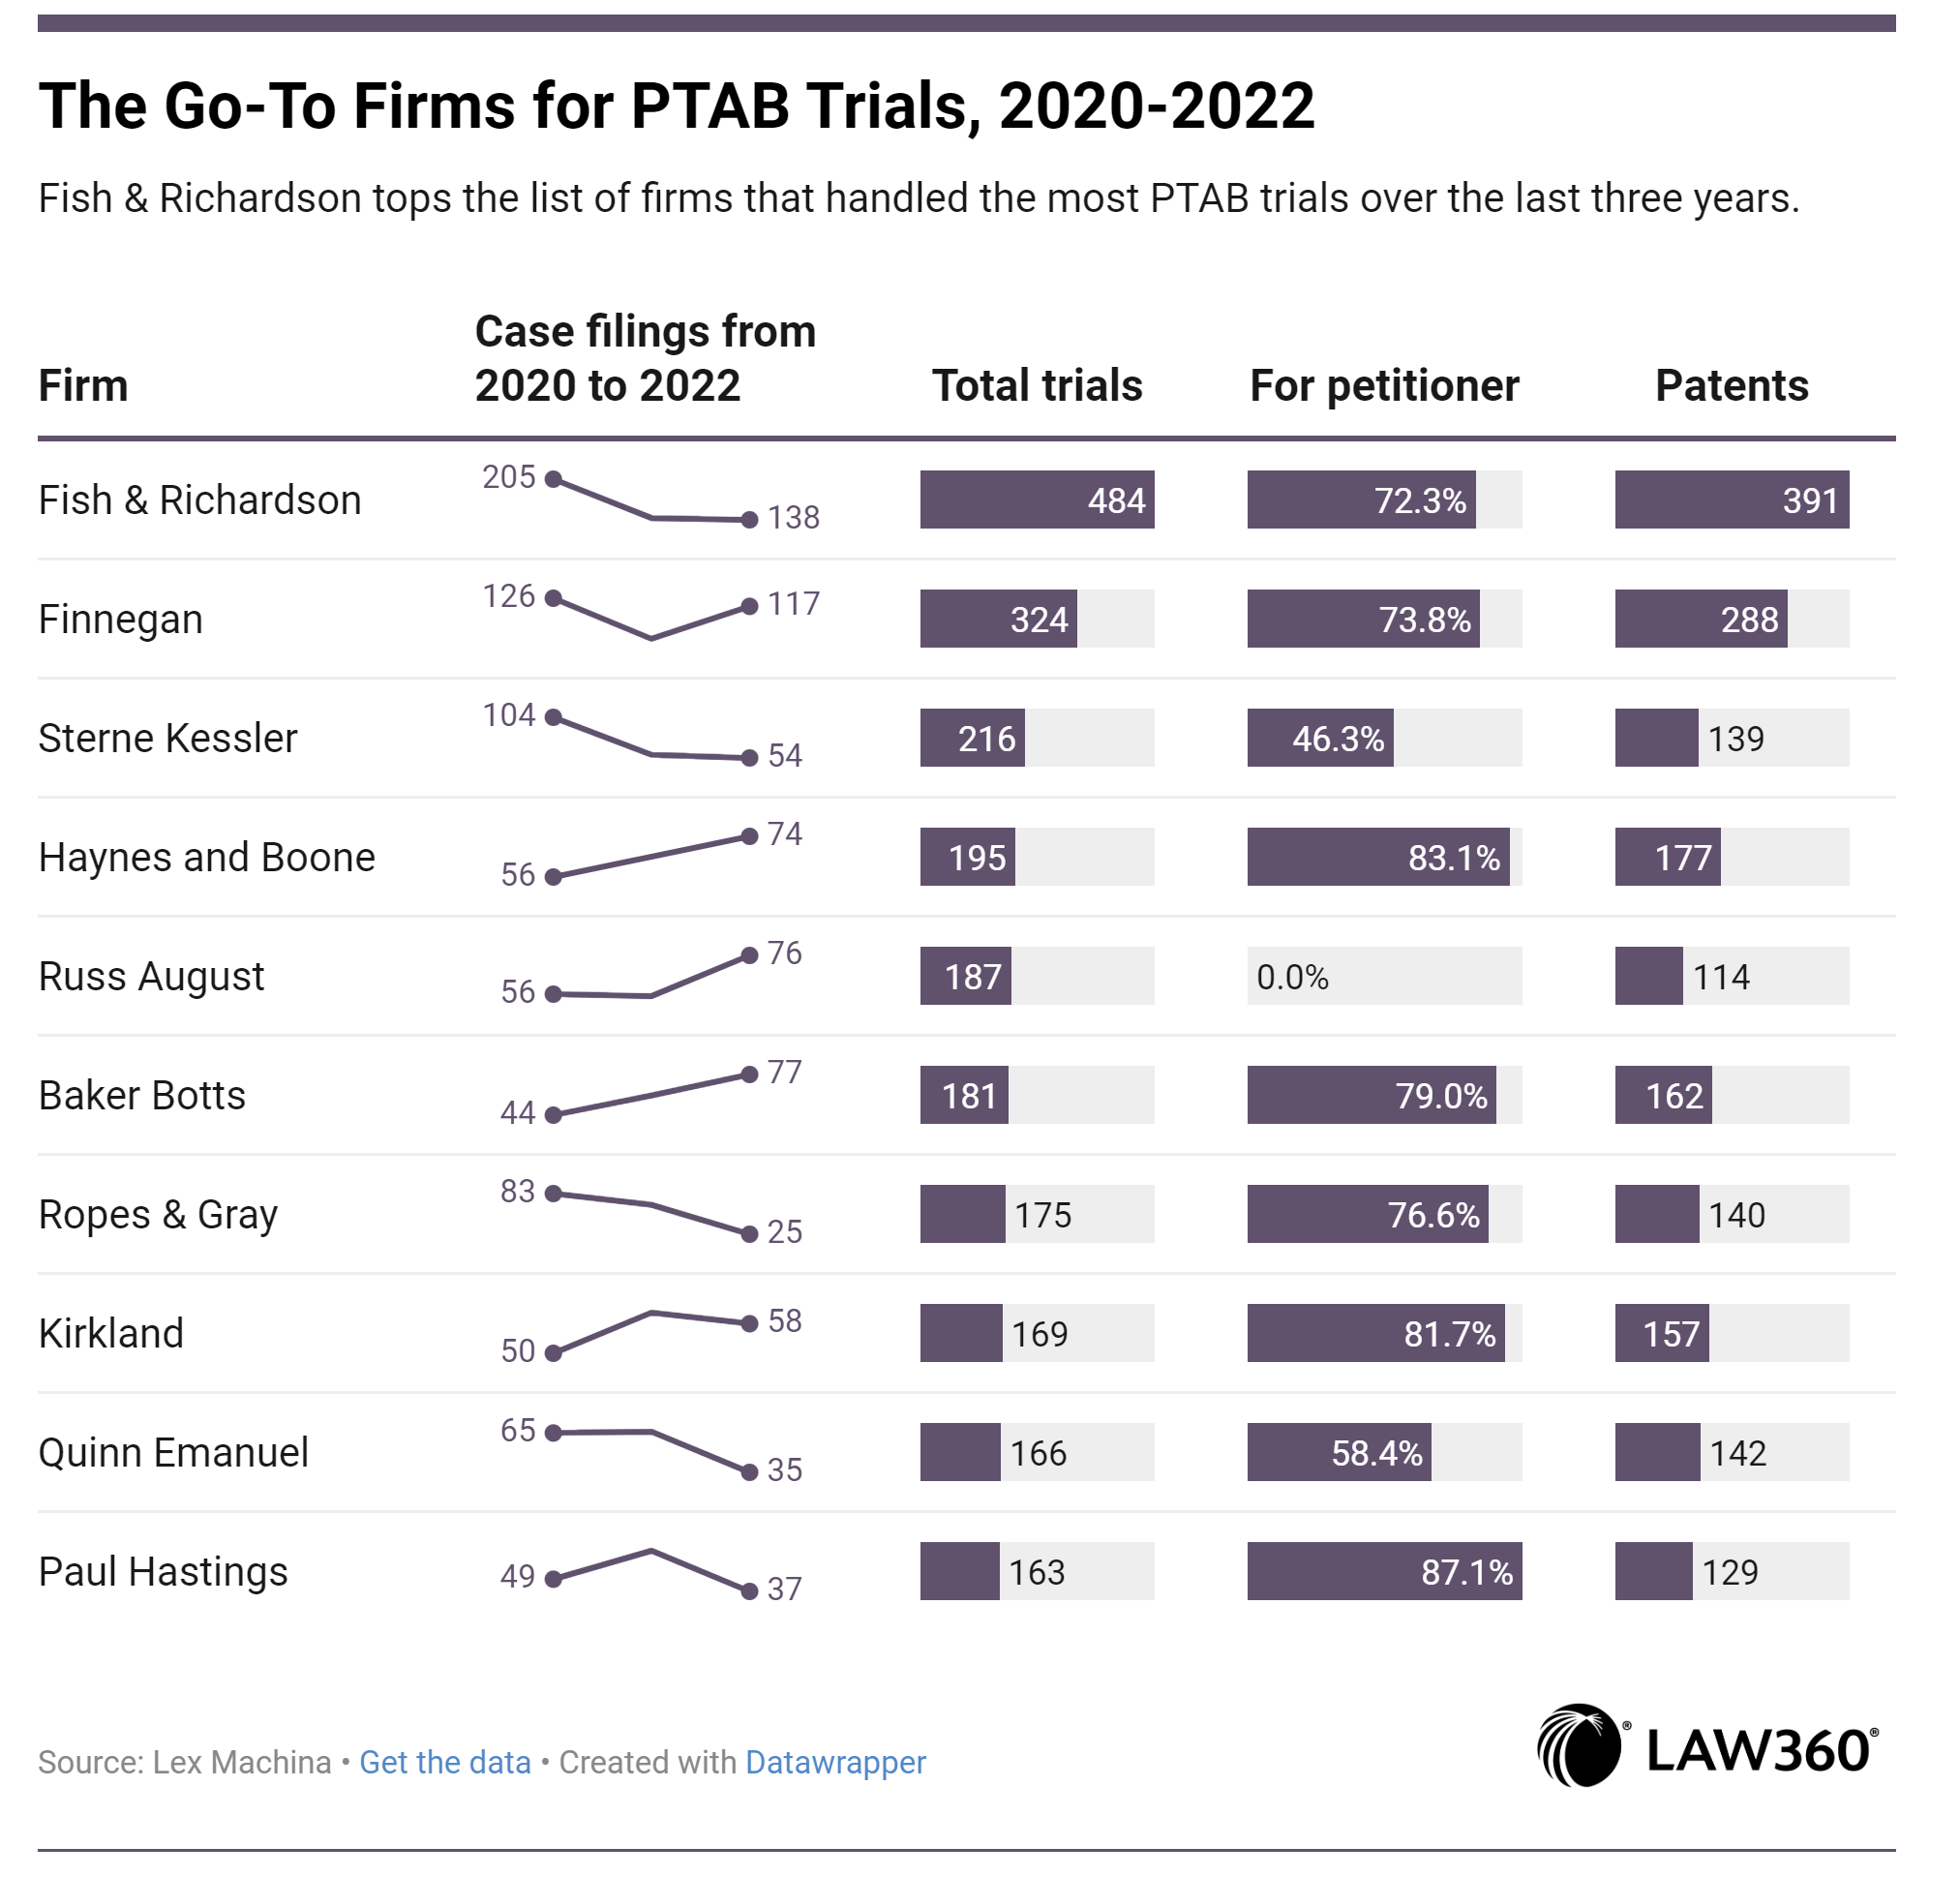 The Go-To Firms for PTAB Trials, 2020-2022